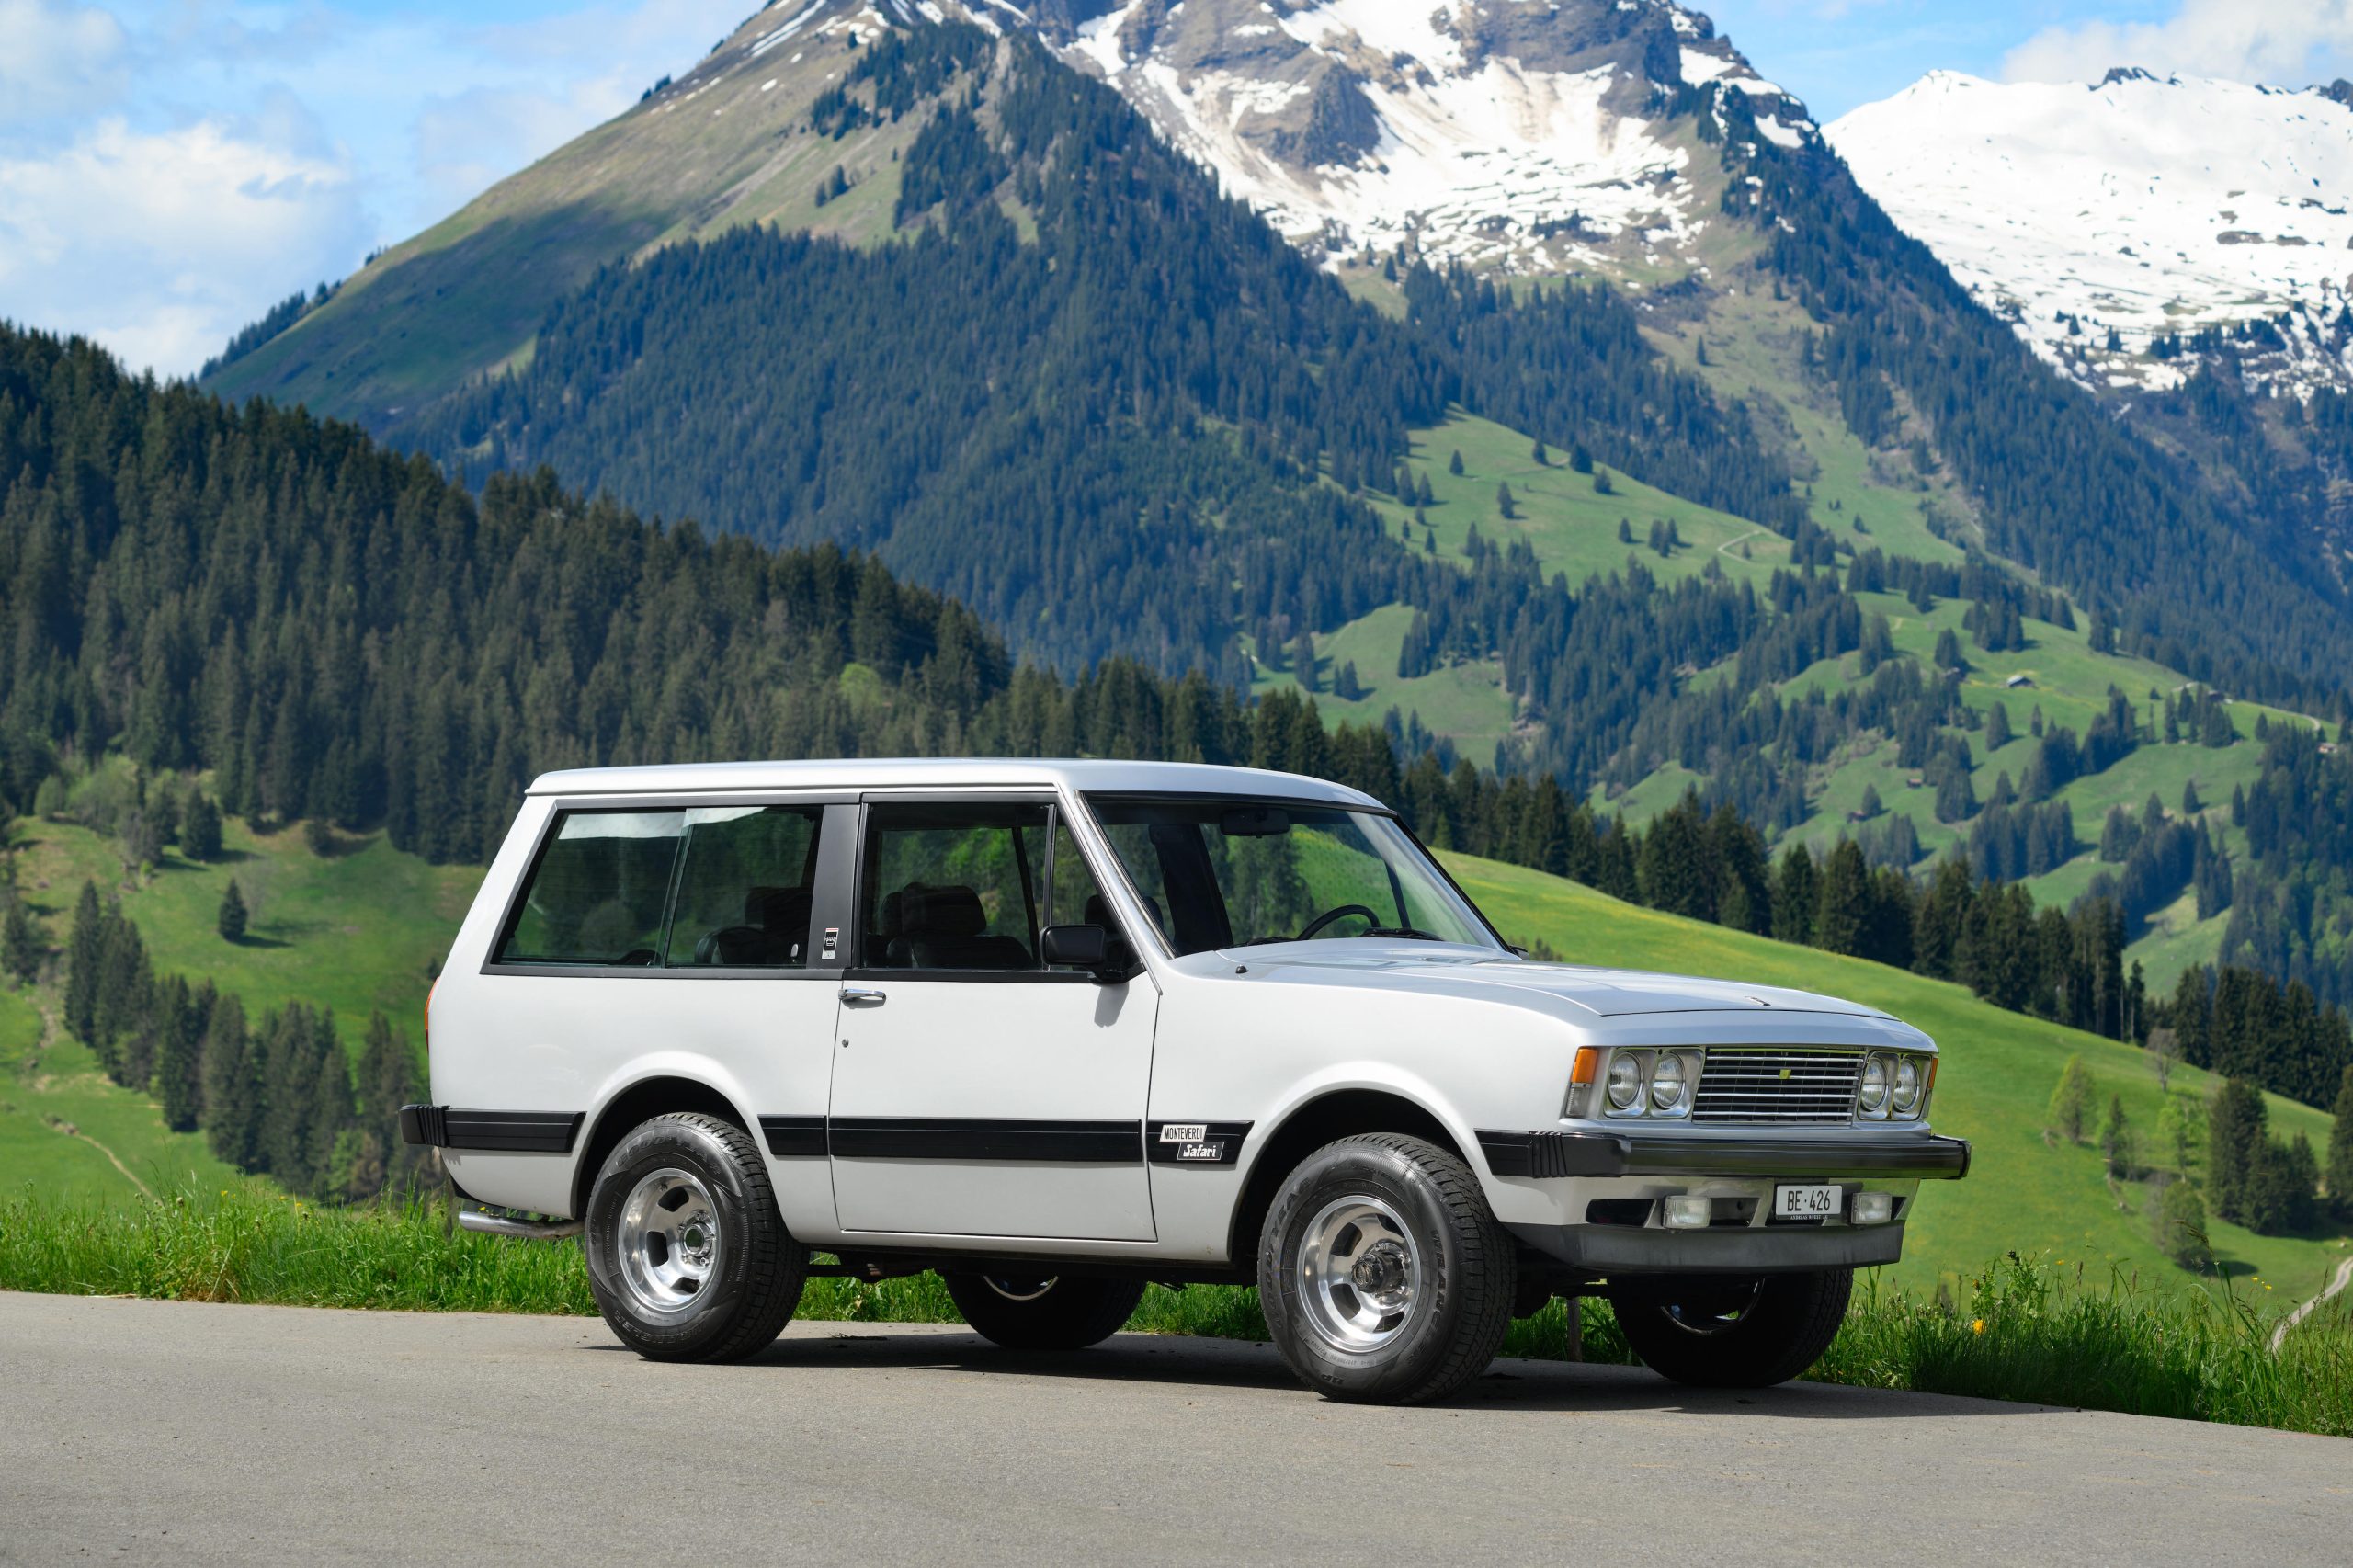 This Swiss Safari may be the first Super SUV